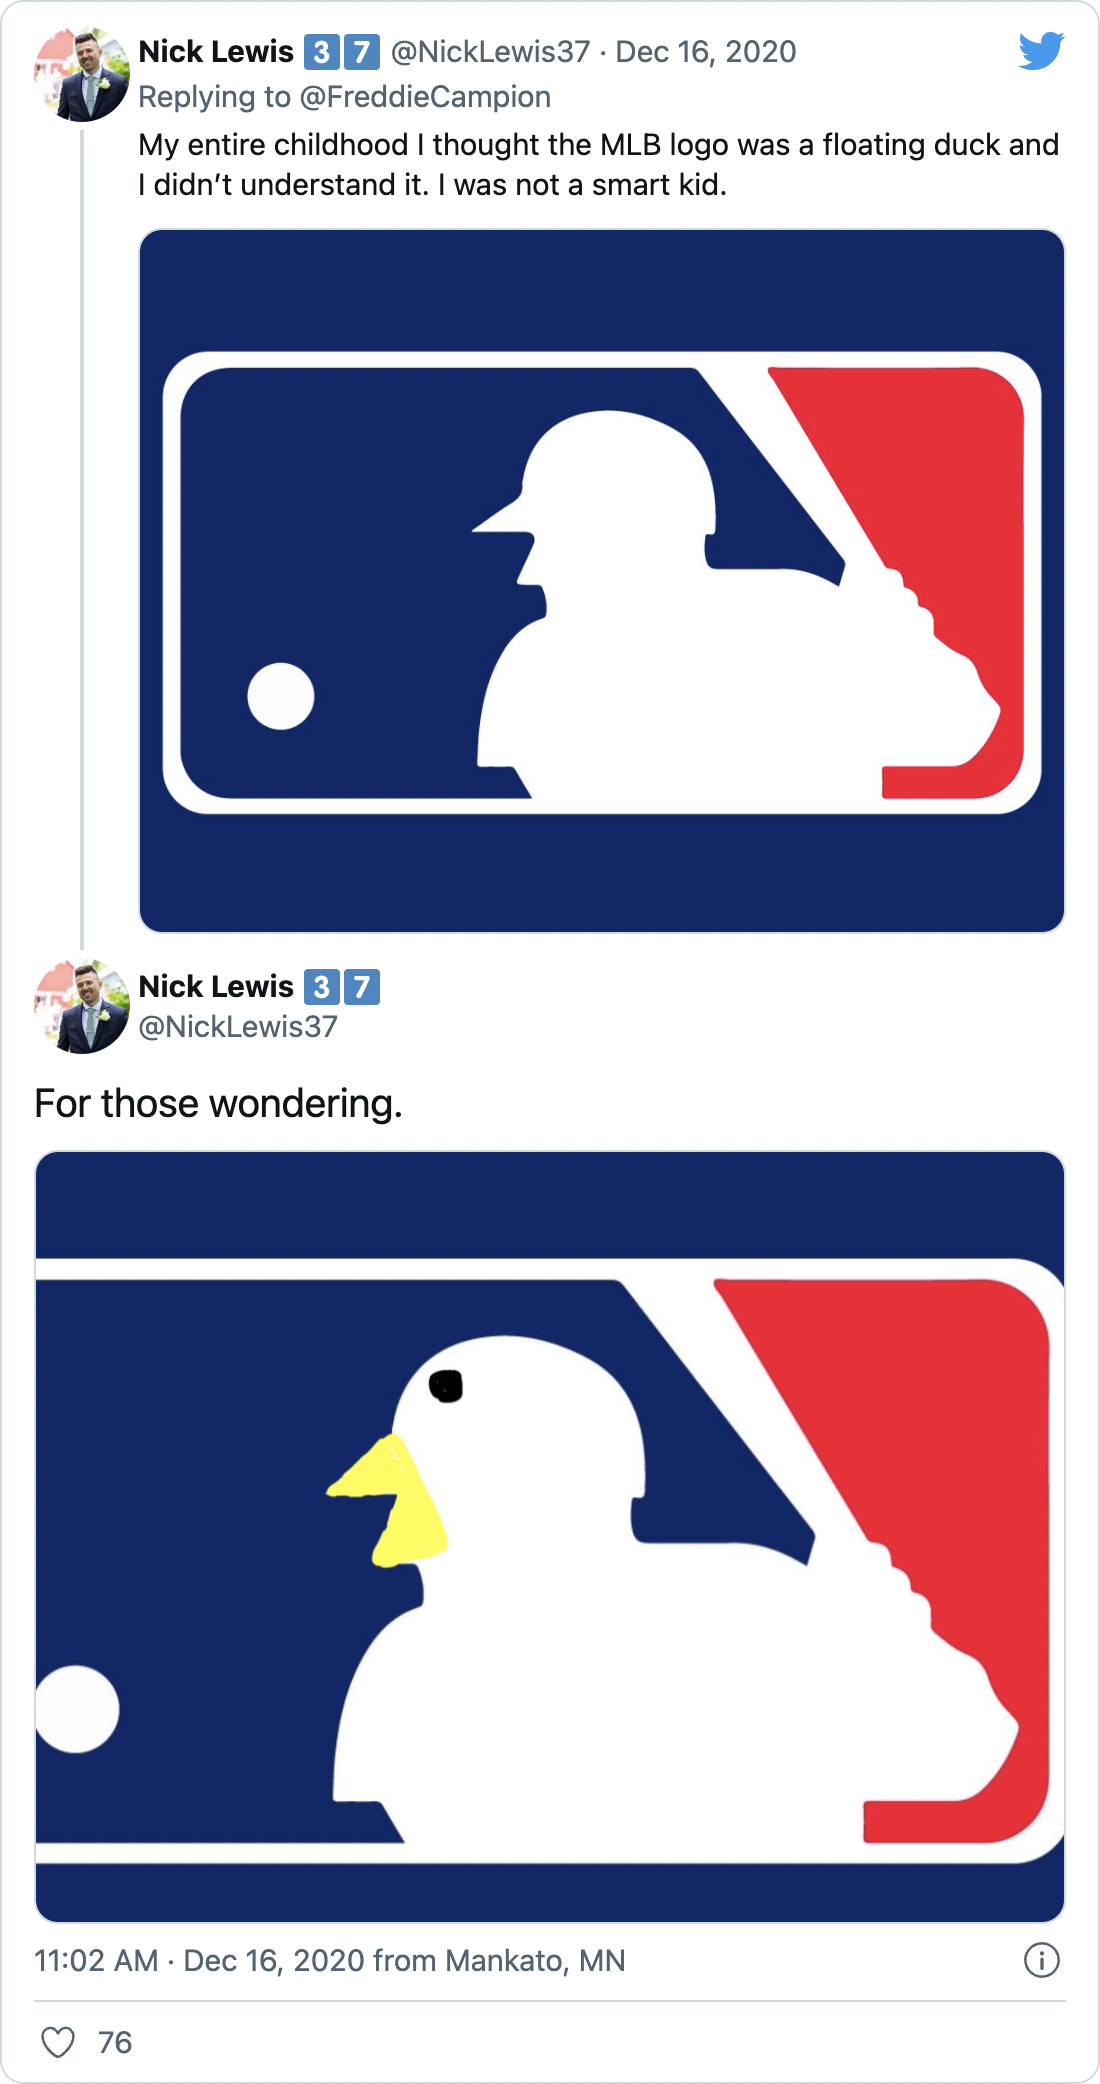 My entire childhood I thought the MLB logo was a floating duck and I didn’t understand it. I was not a smart kid. - @NickLewis37